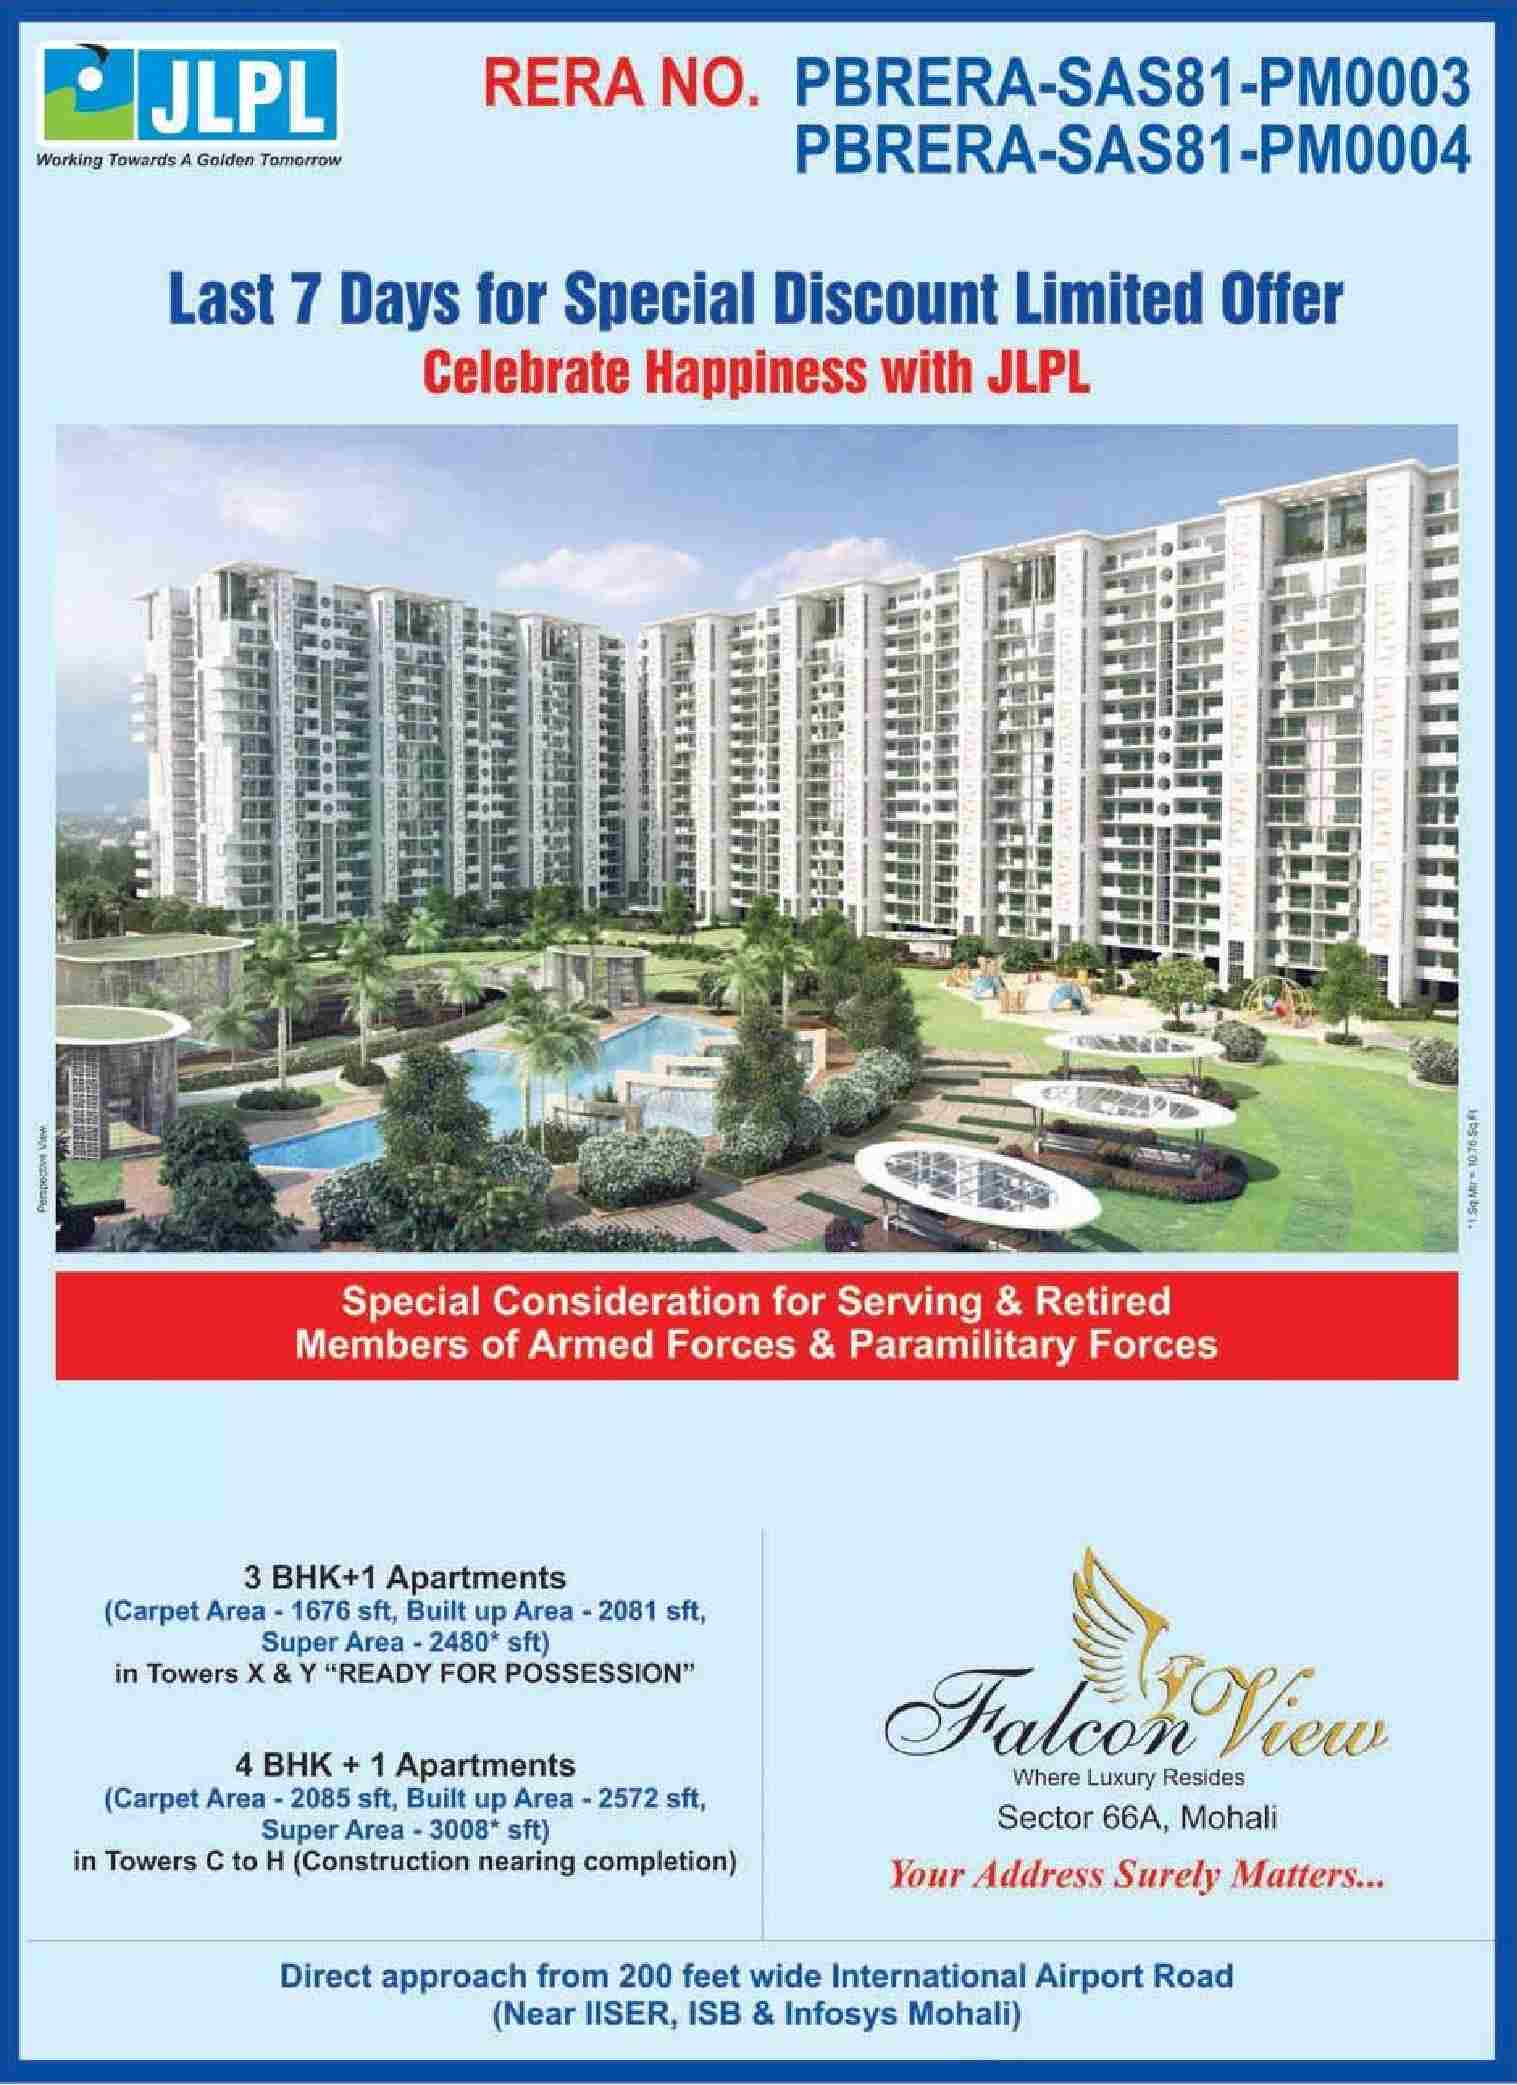 Celebrate happiness by residing at JLPL Falcon View in Mohali